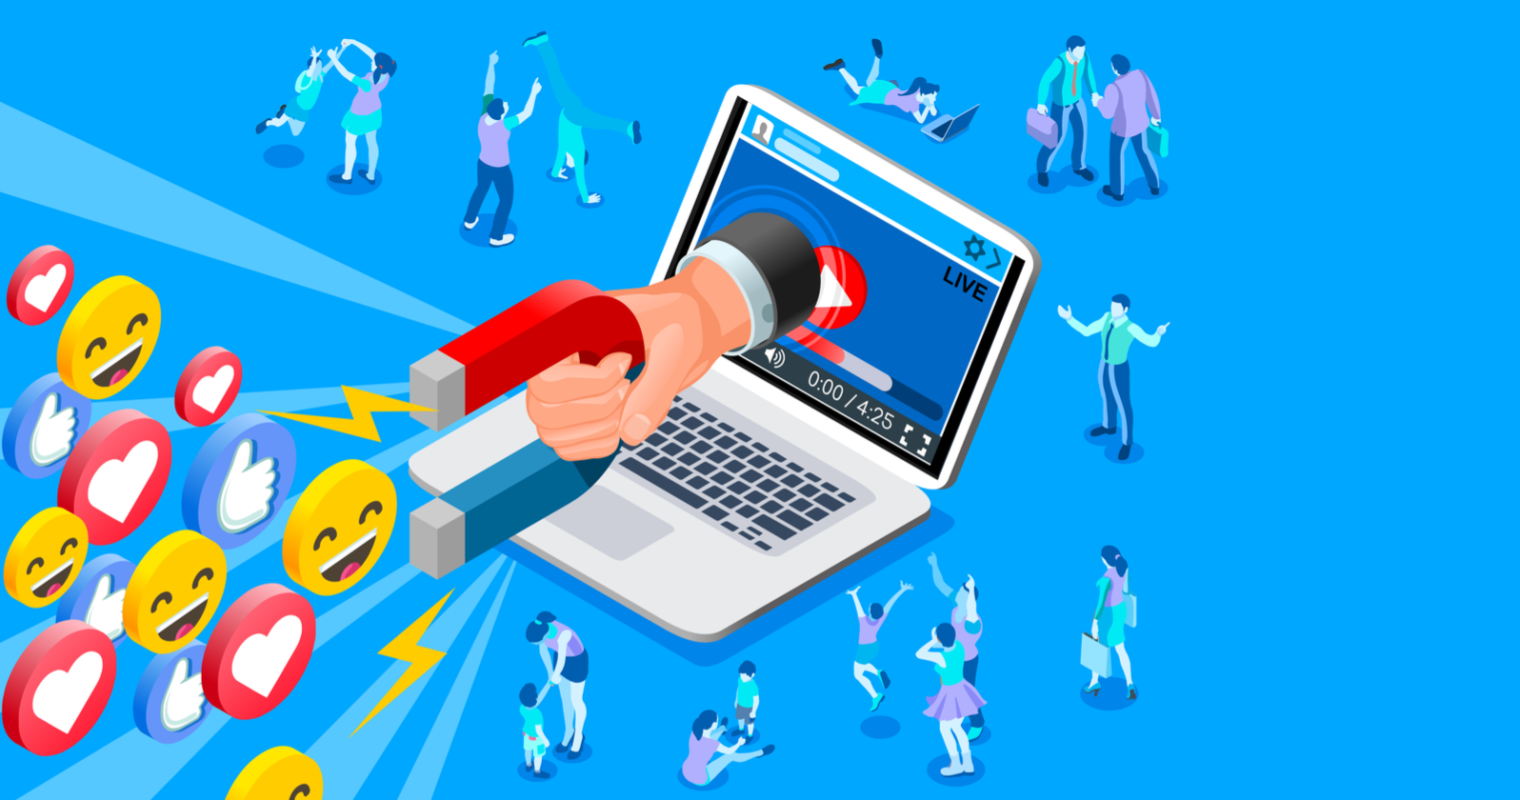 #SoldInfluencers: Read How Paid Videos by UniCorp are Instantly Circulated via Social Media Influencers to Build a Bogus Narrative